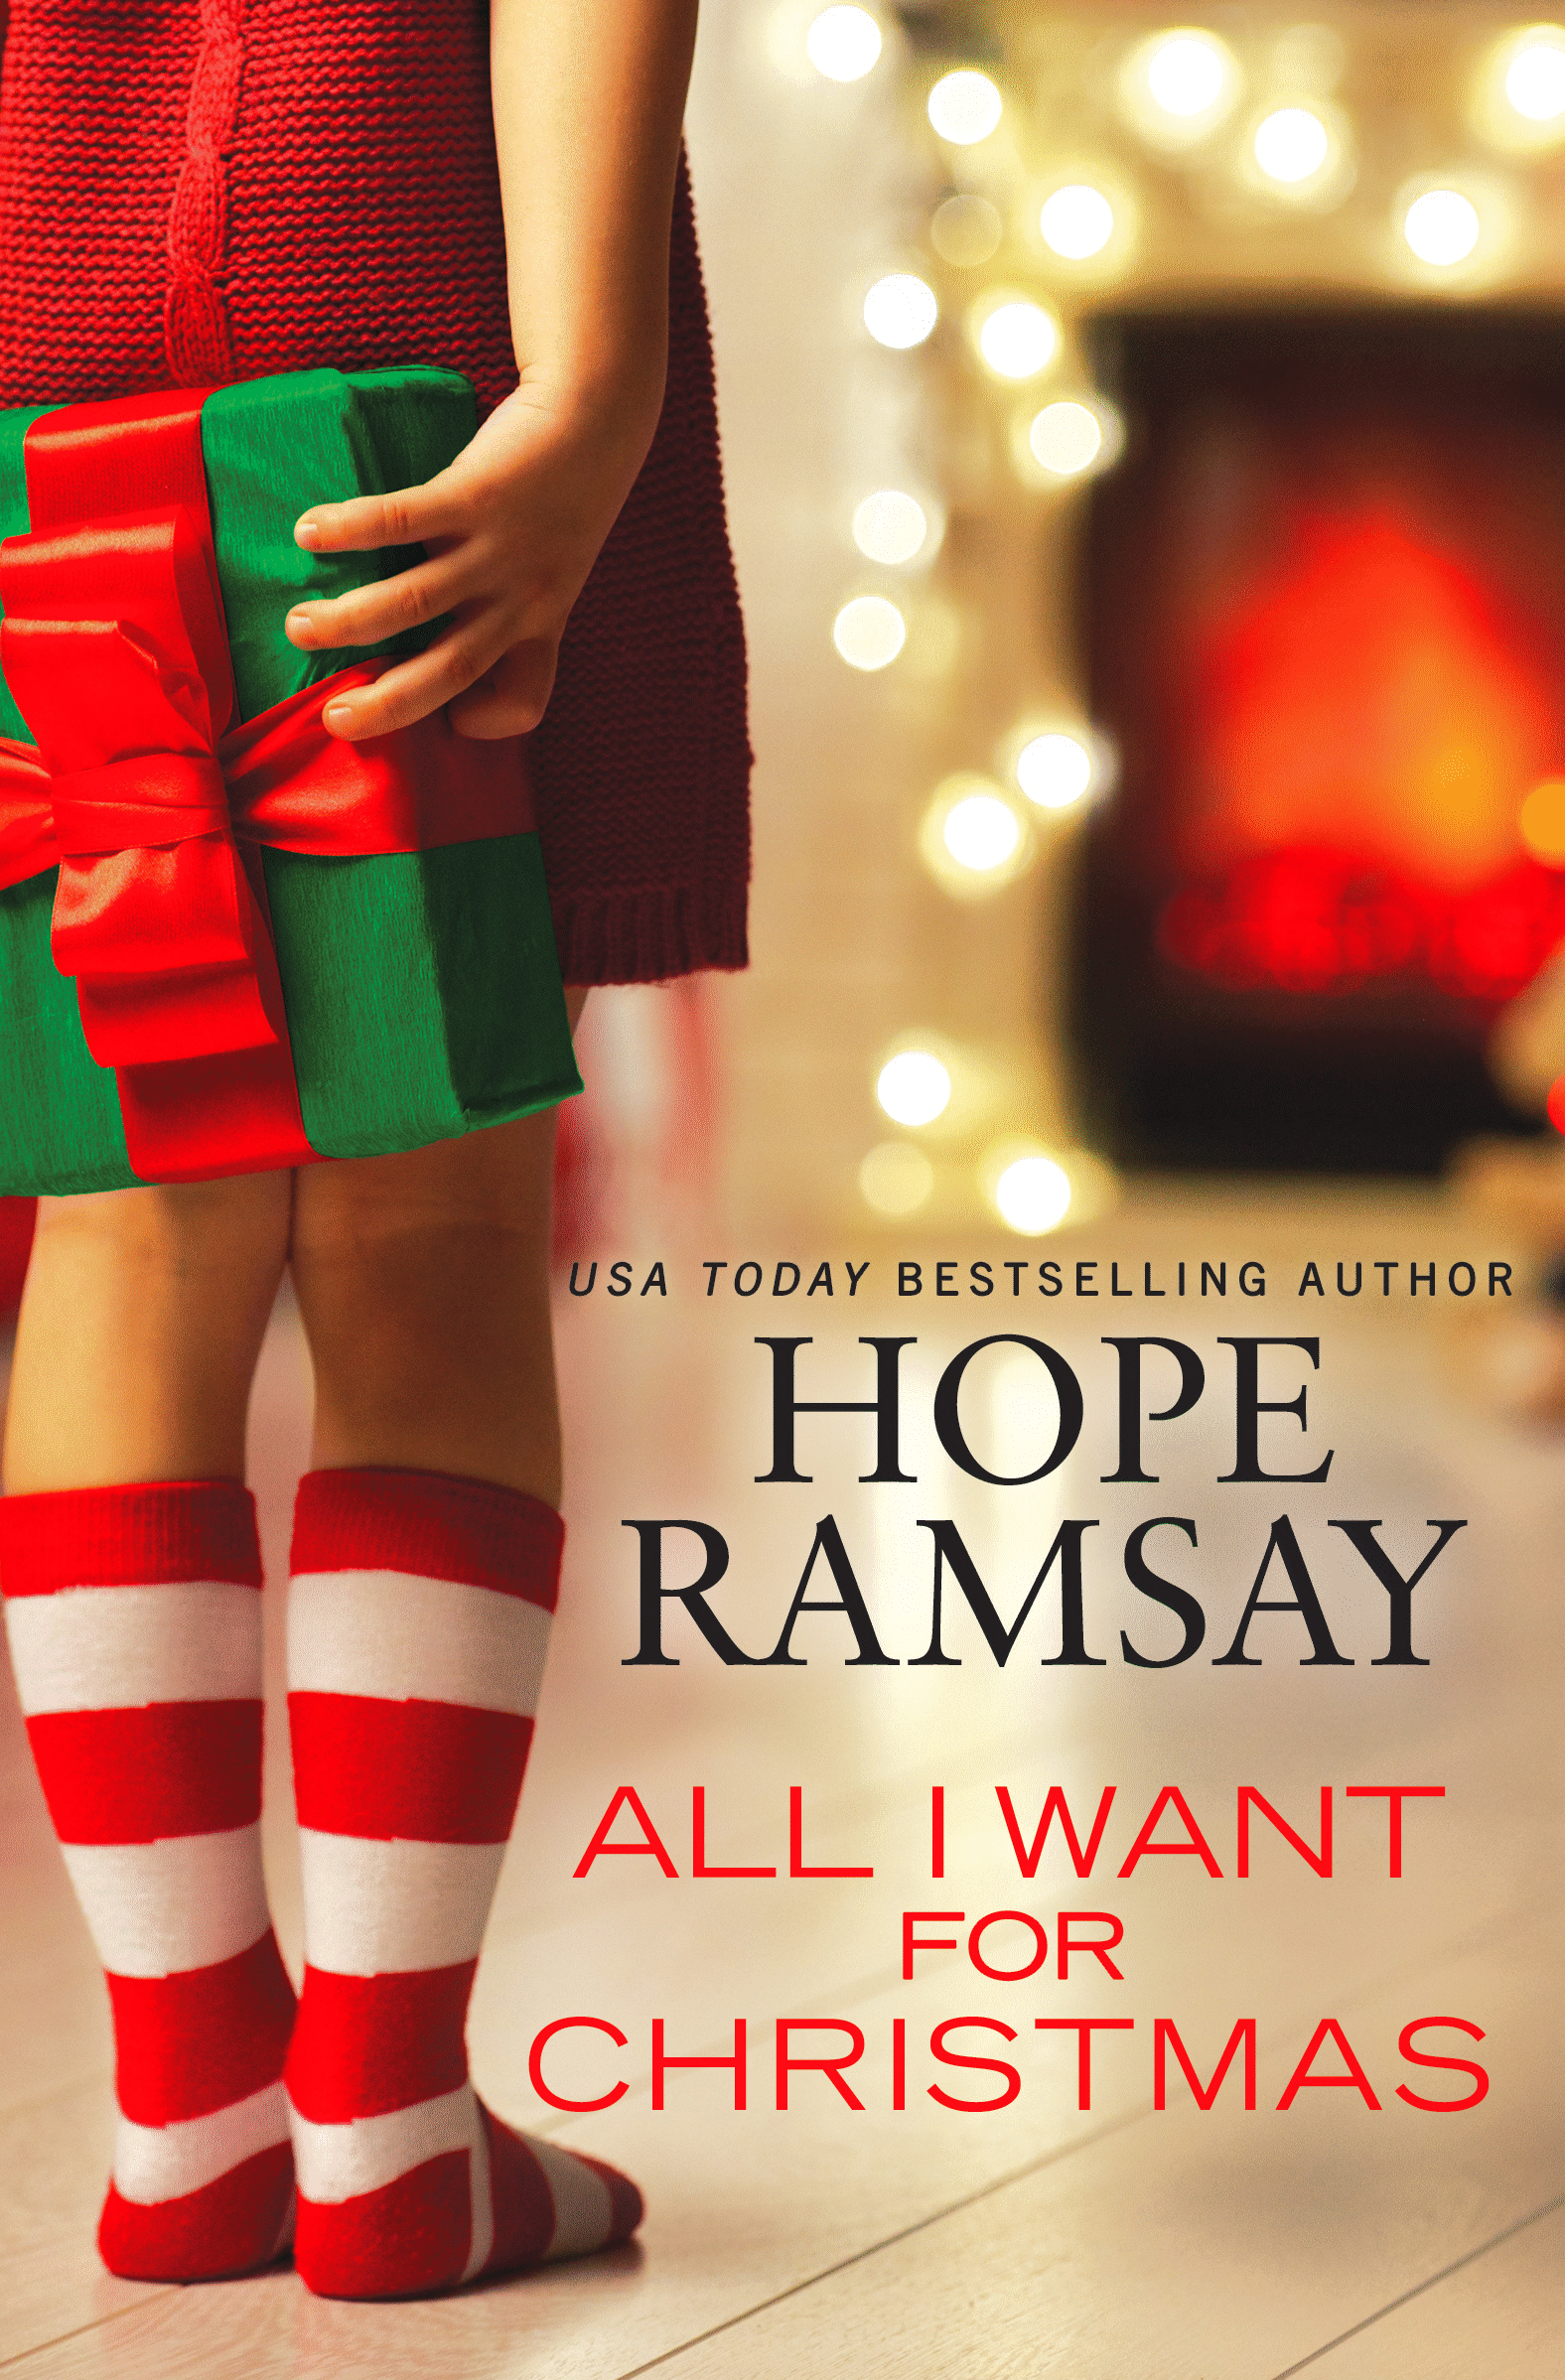 All I Want for Christmas by Hope Ramsay